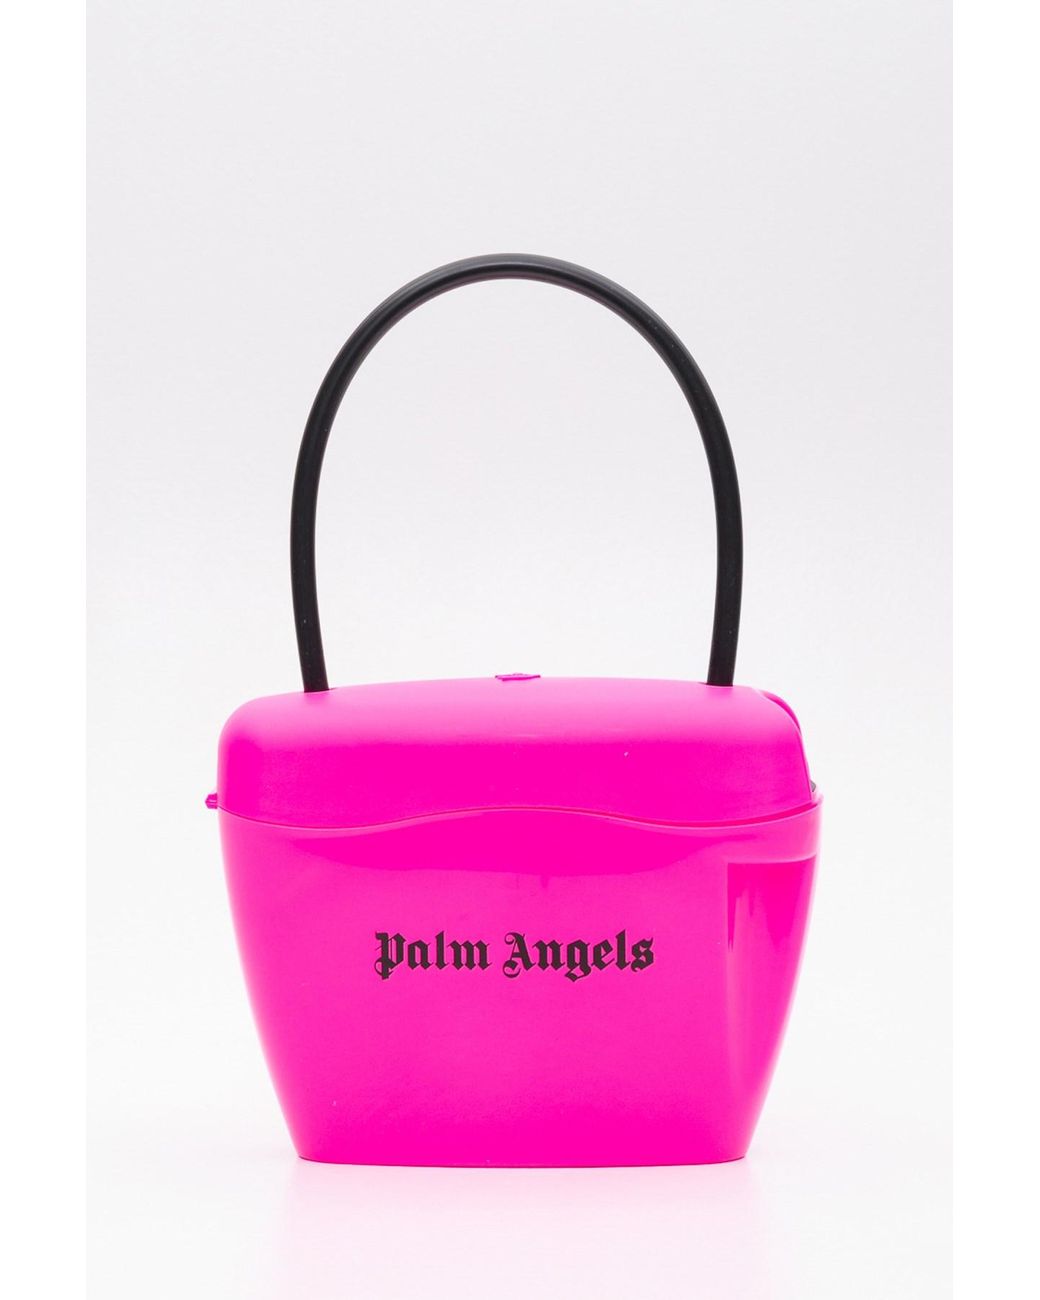 Palm Angels Padlock Bag in Pink | Lyst